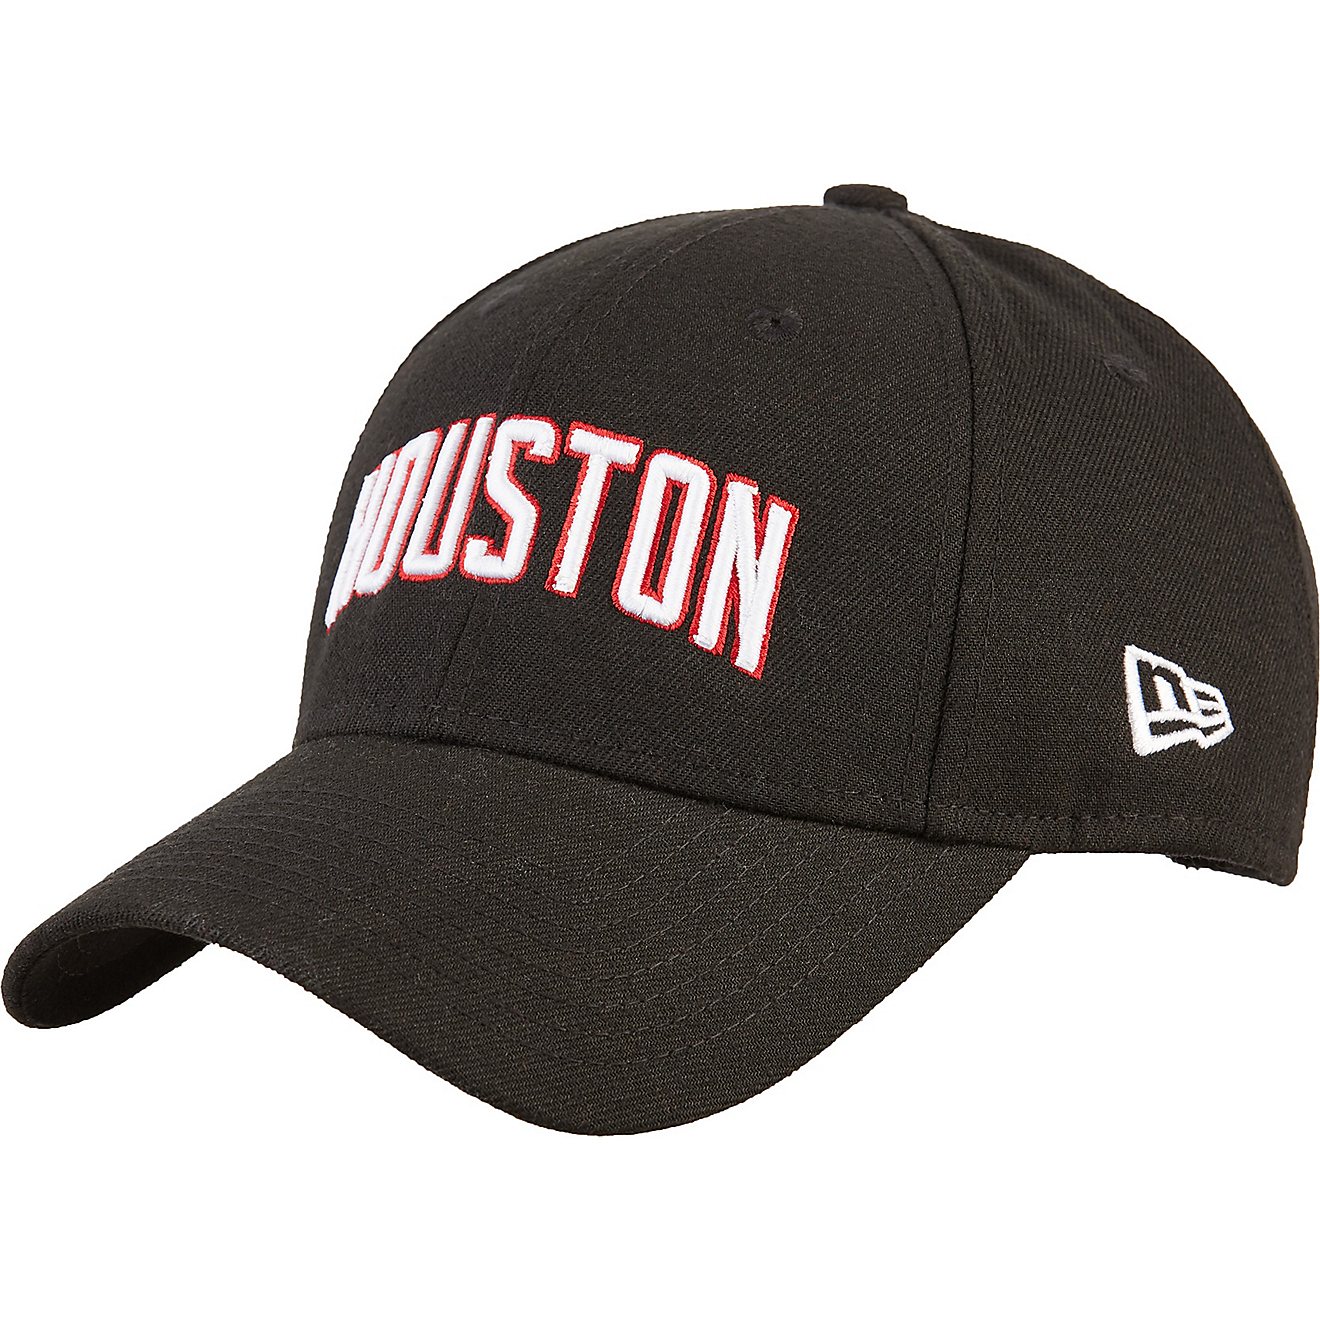 New Era Men's Houston Rockets 9FORTY Cap                                                                                         - view number 1